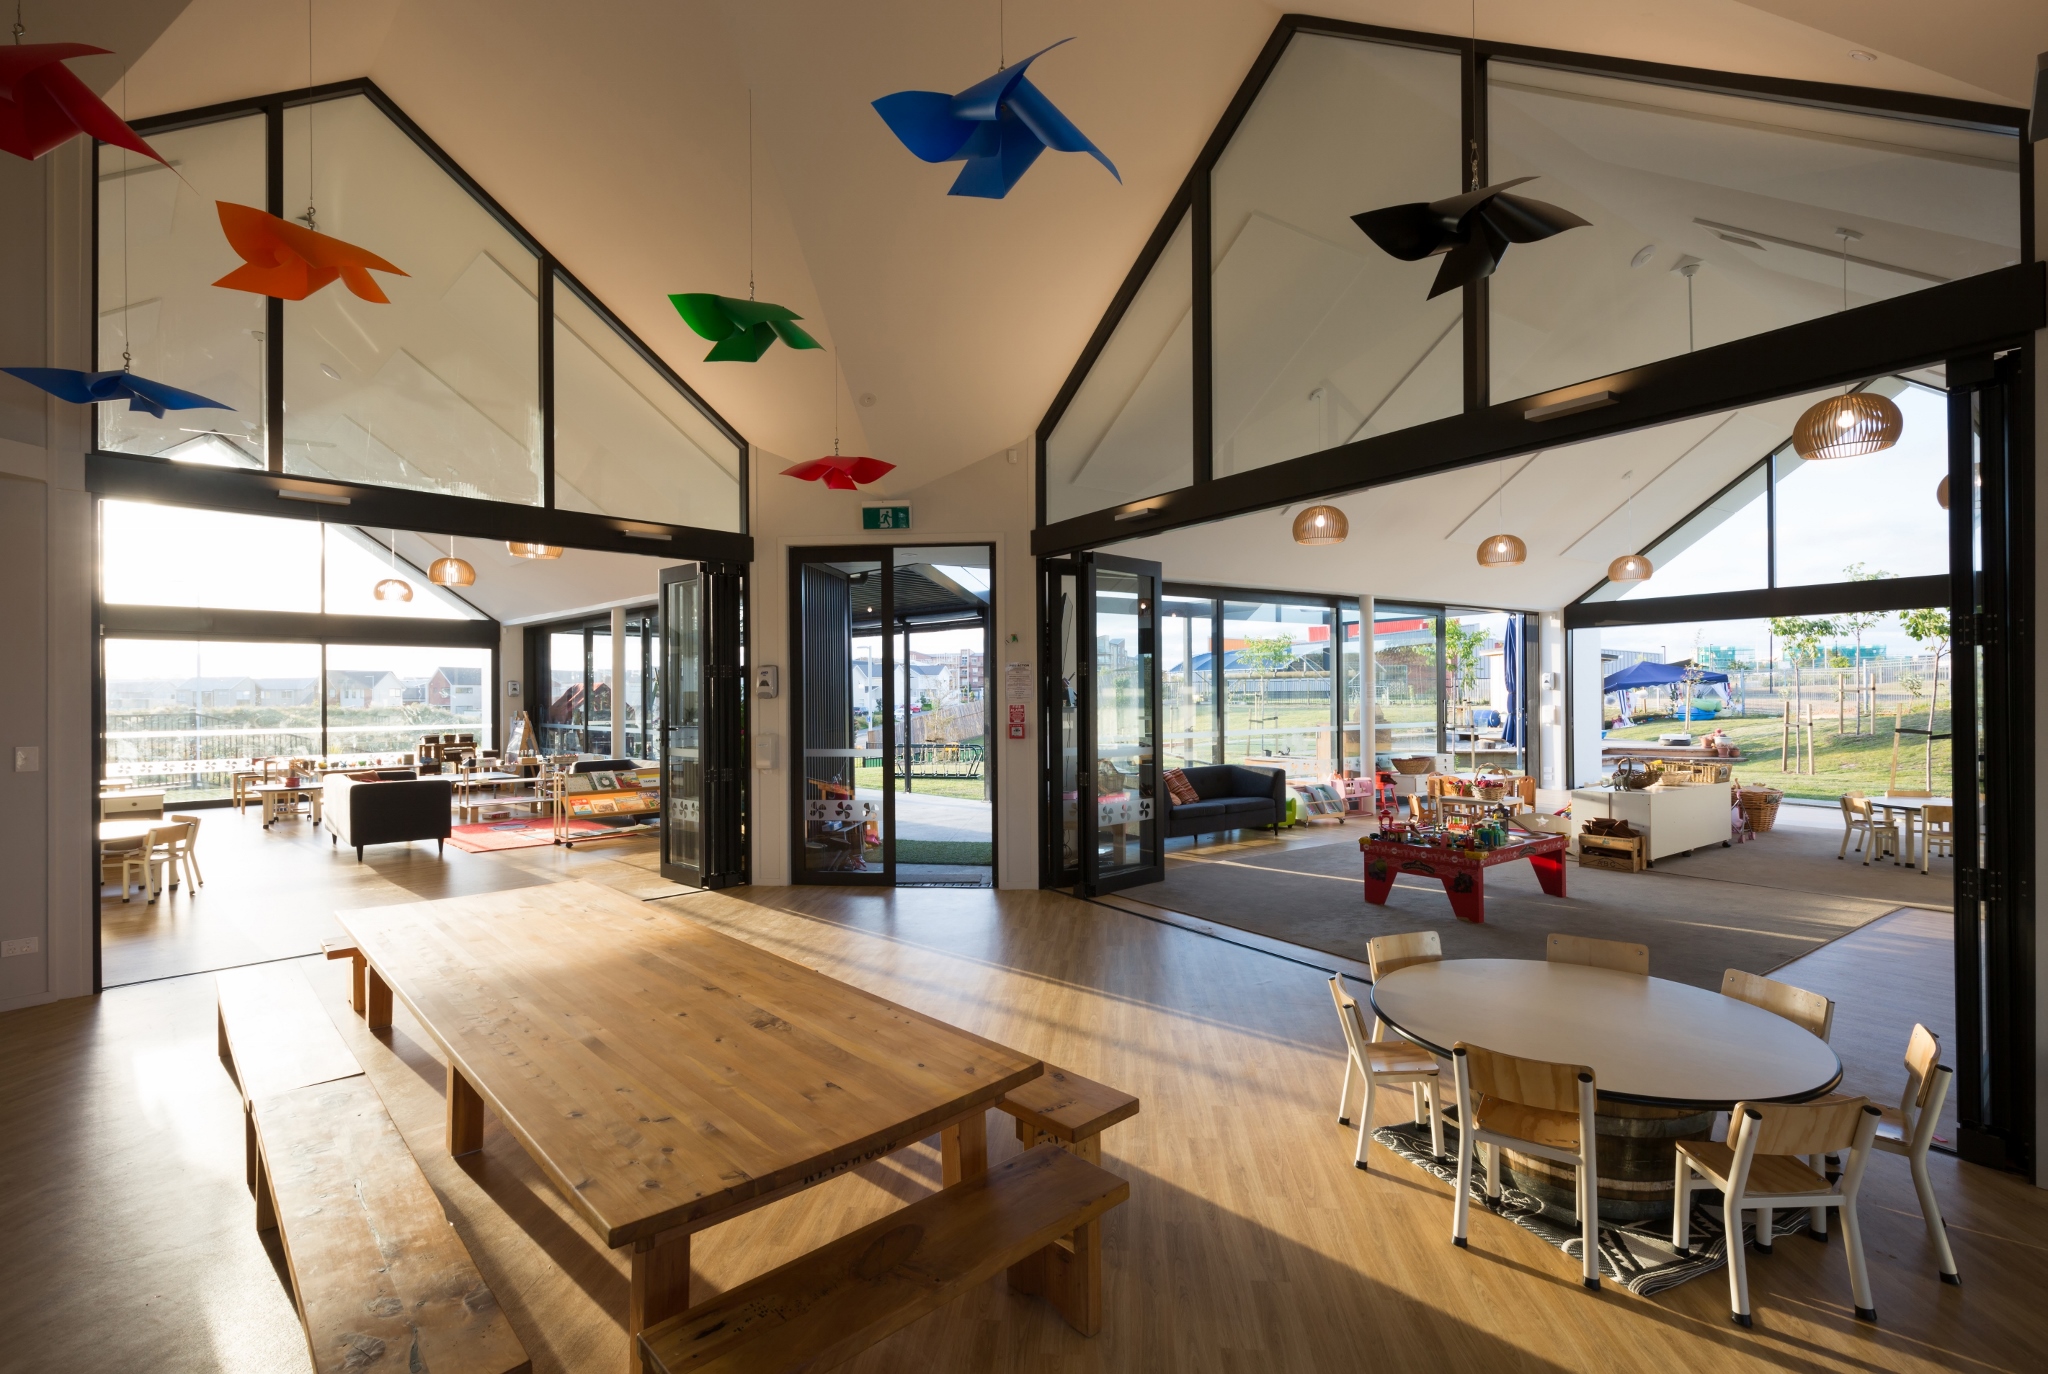 hobsonville point early learning centre-11